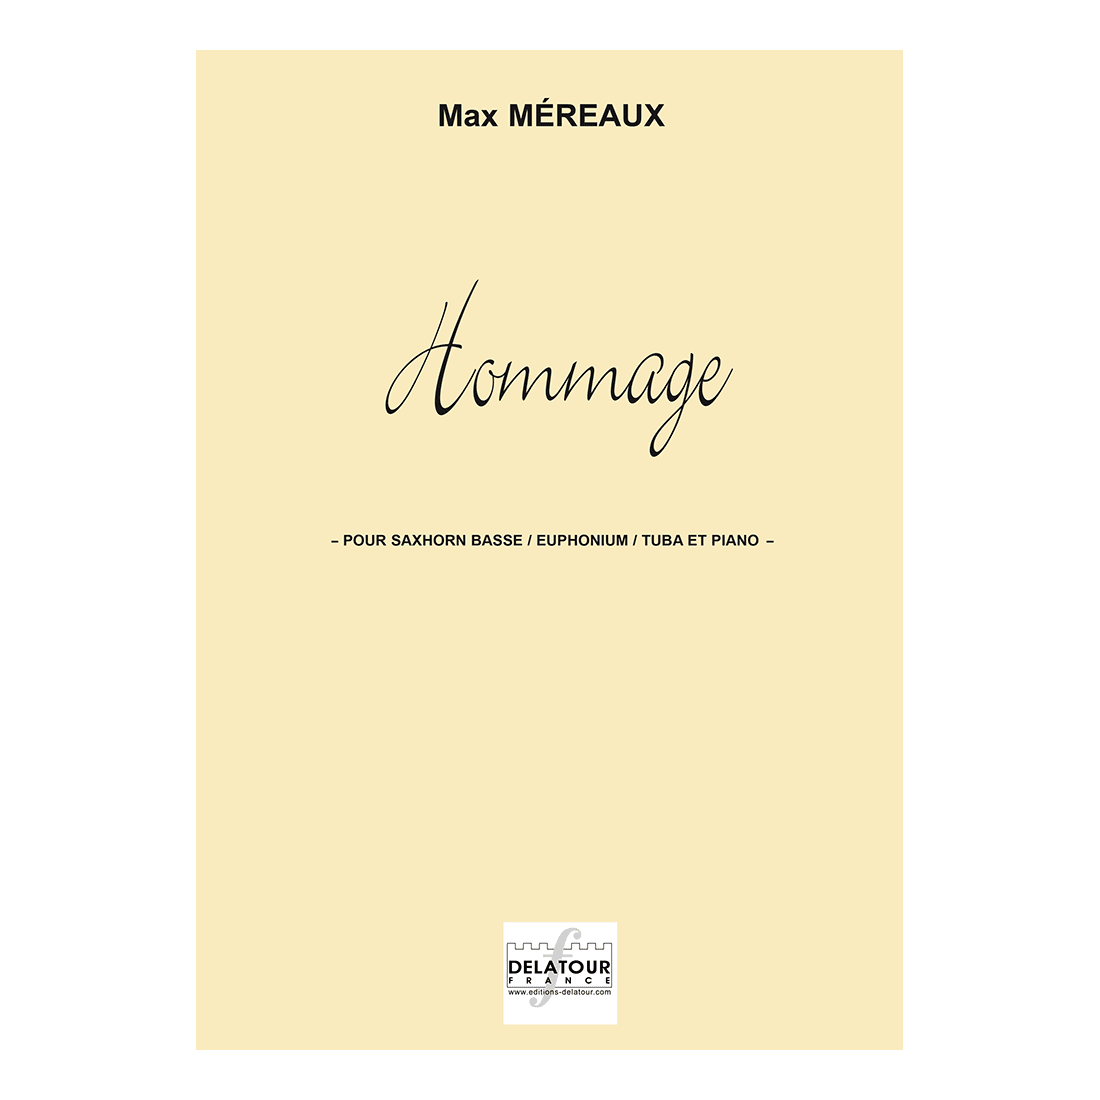 Hommage for bass saxhorn, euphonium or tuba and piano